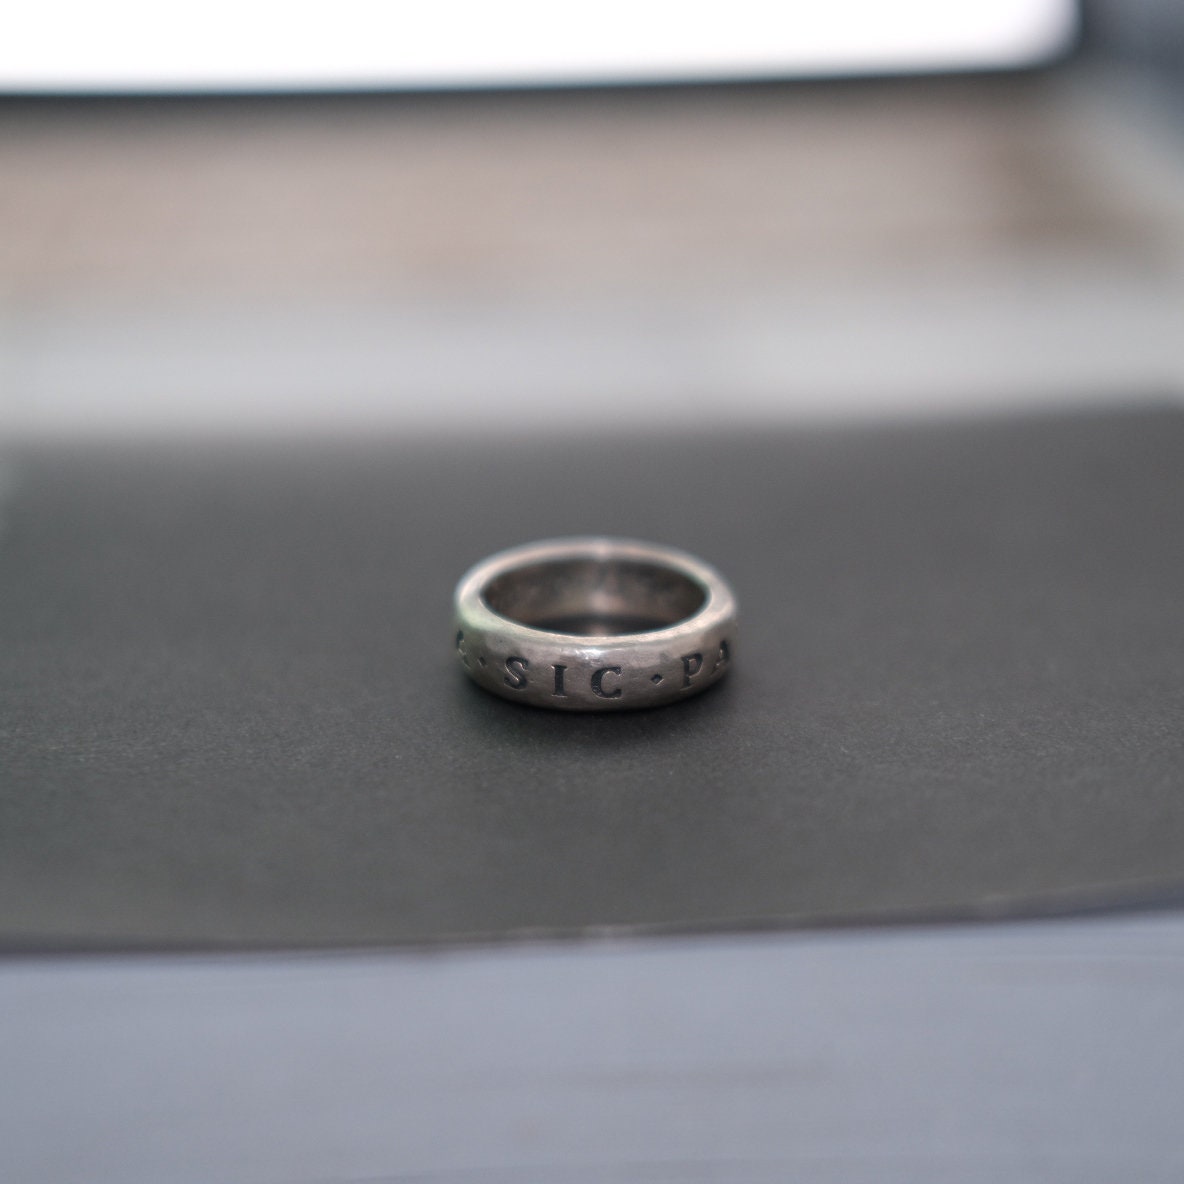 Uncharted Nathan Drake ring made sterling silver 925- artisan product | eBay